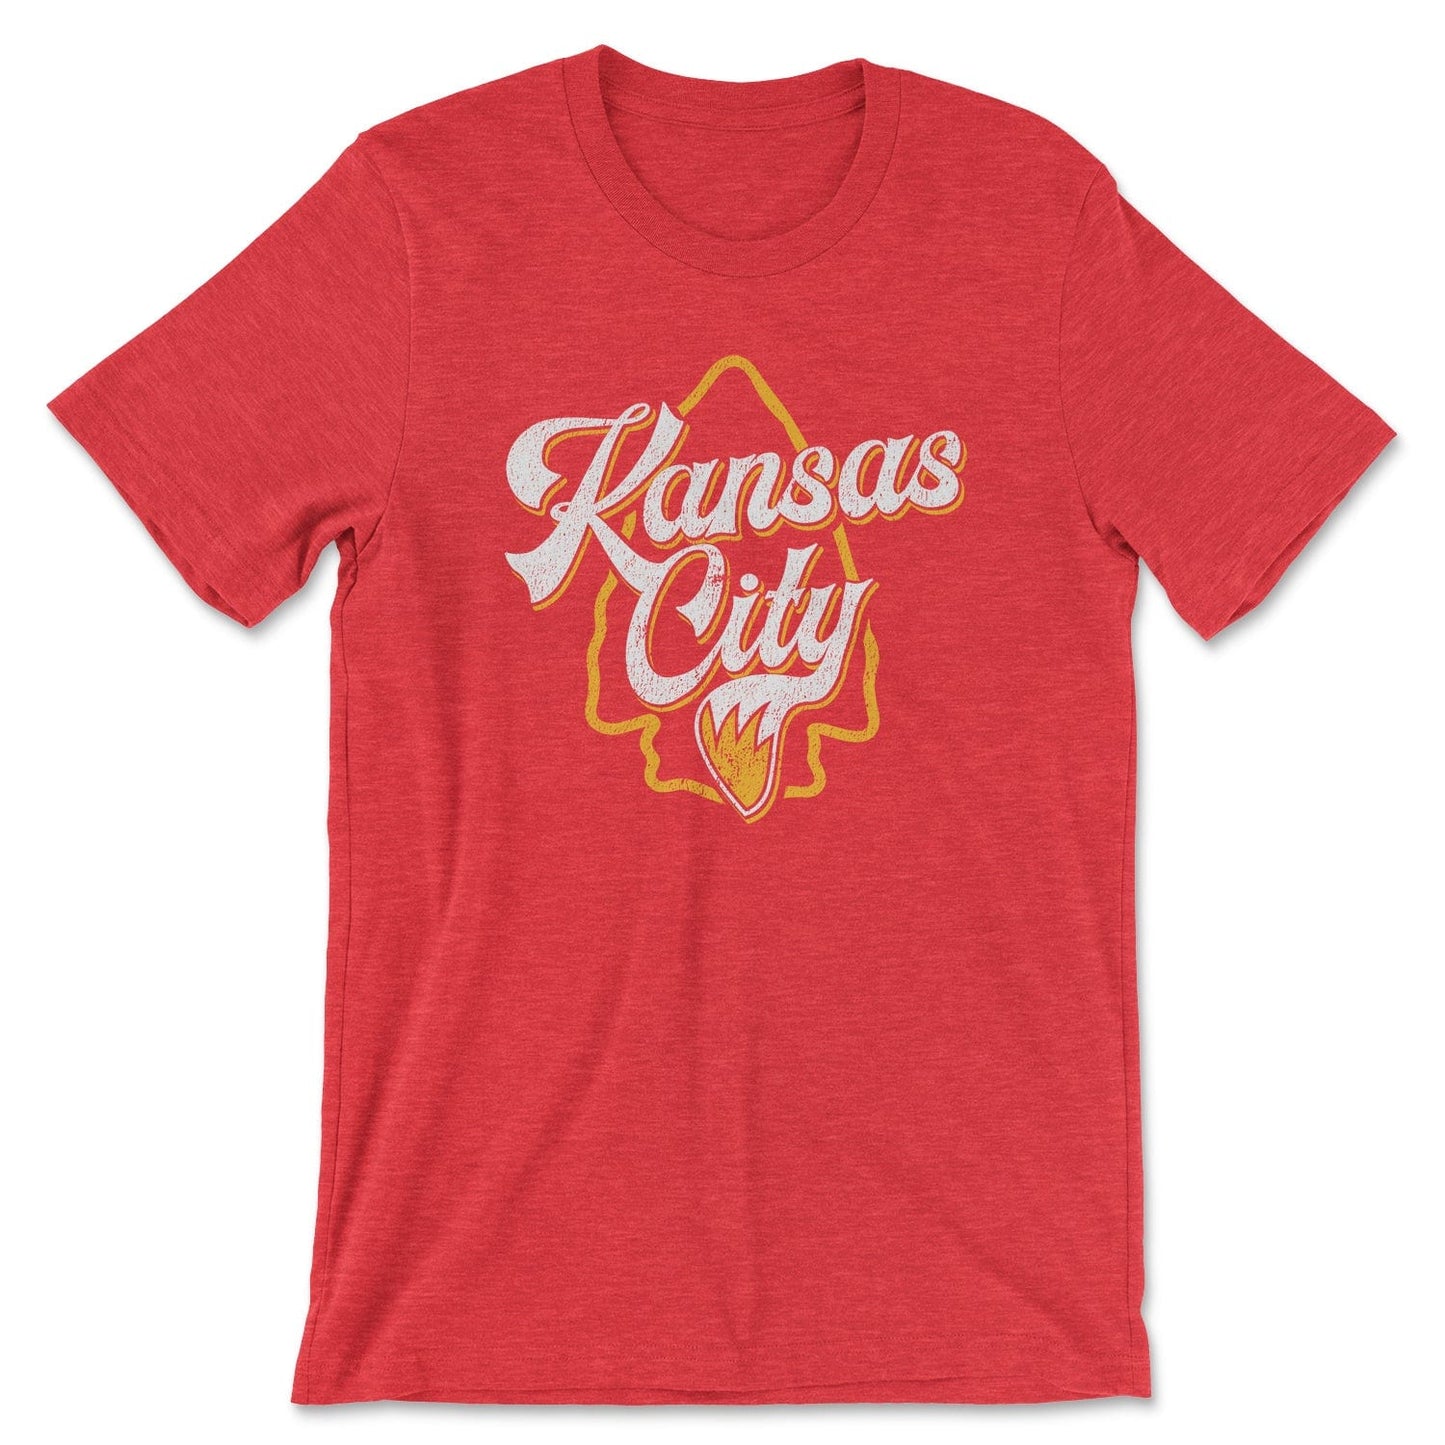 KC Swag Kansas City Chiefs white/yellow KANSAS CITY (with foxtail) with arrowhead graphic on heather red t-shirt